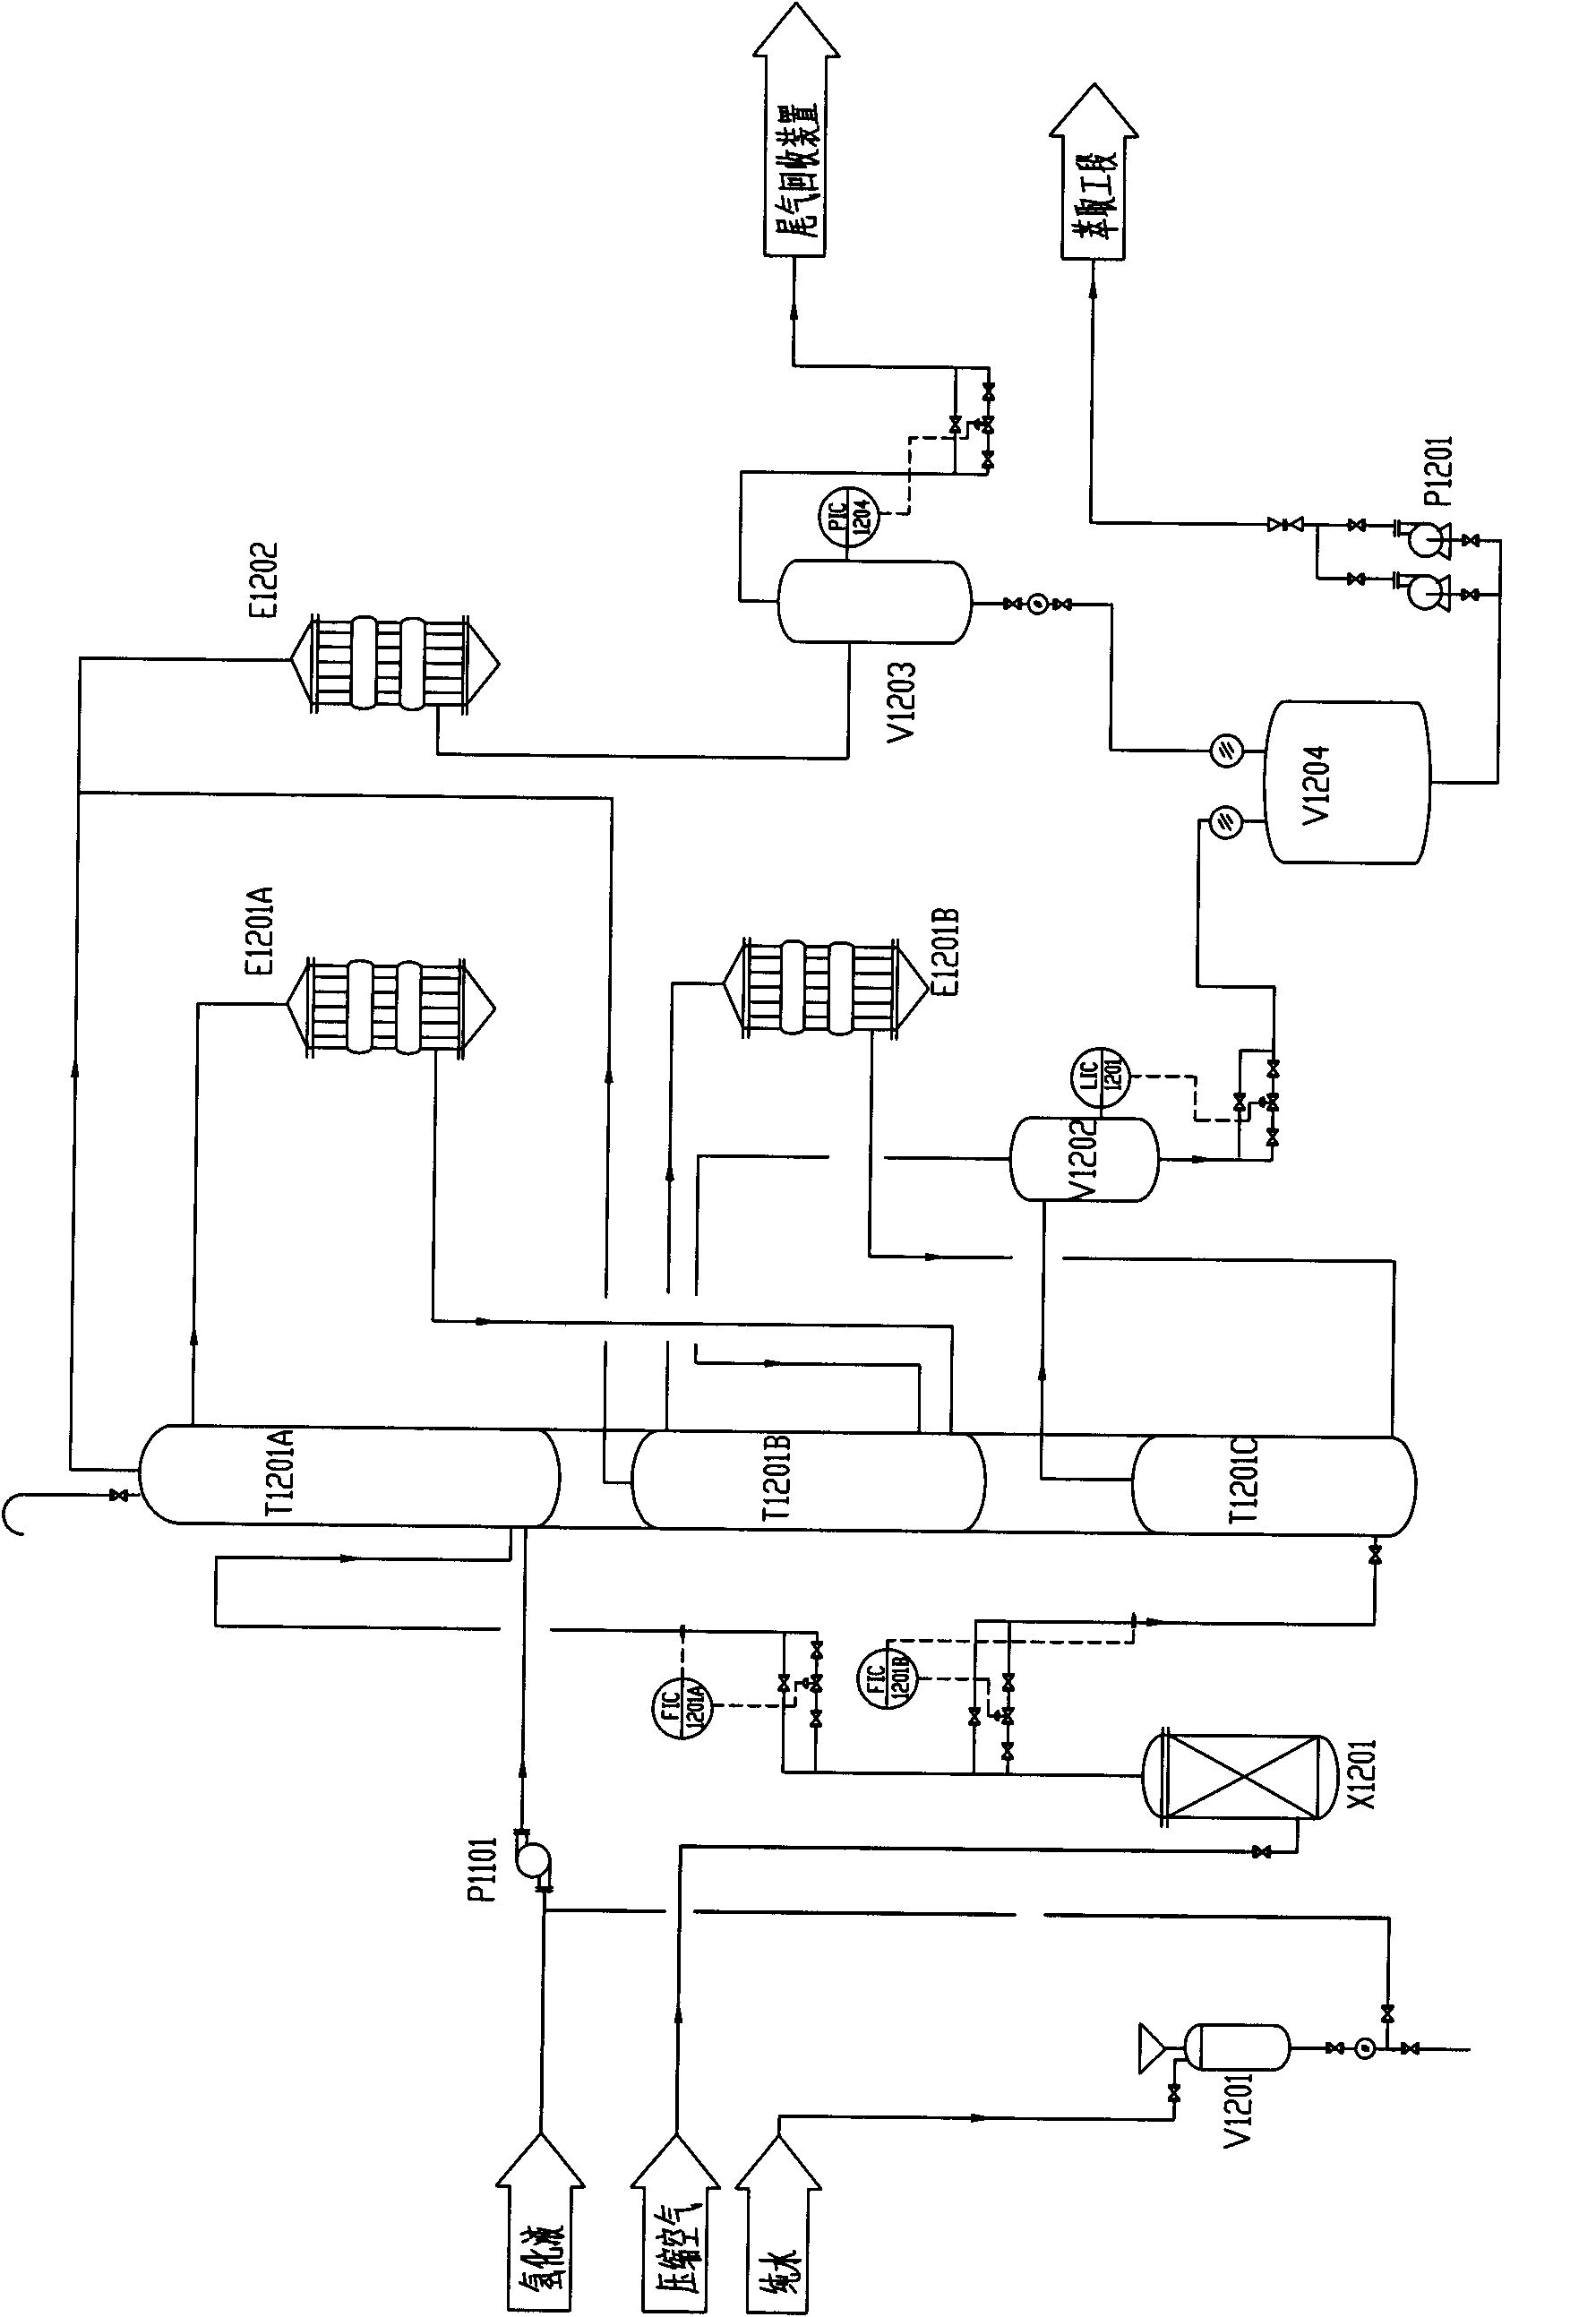 Oxidation system for producing hydrogen peroxide